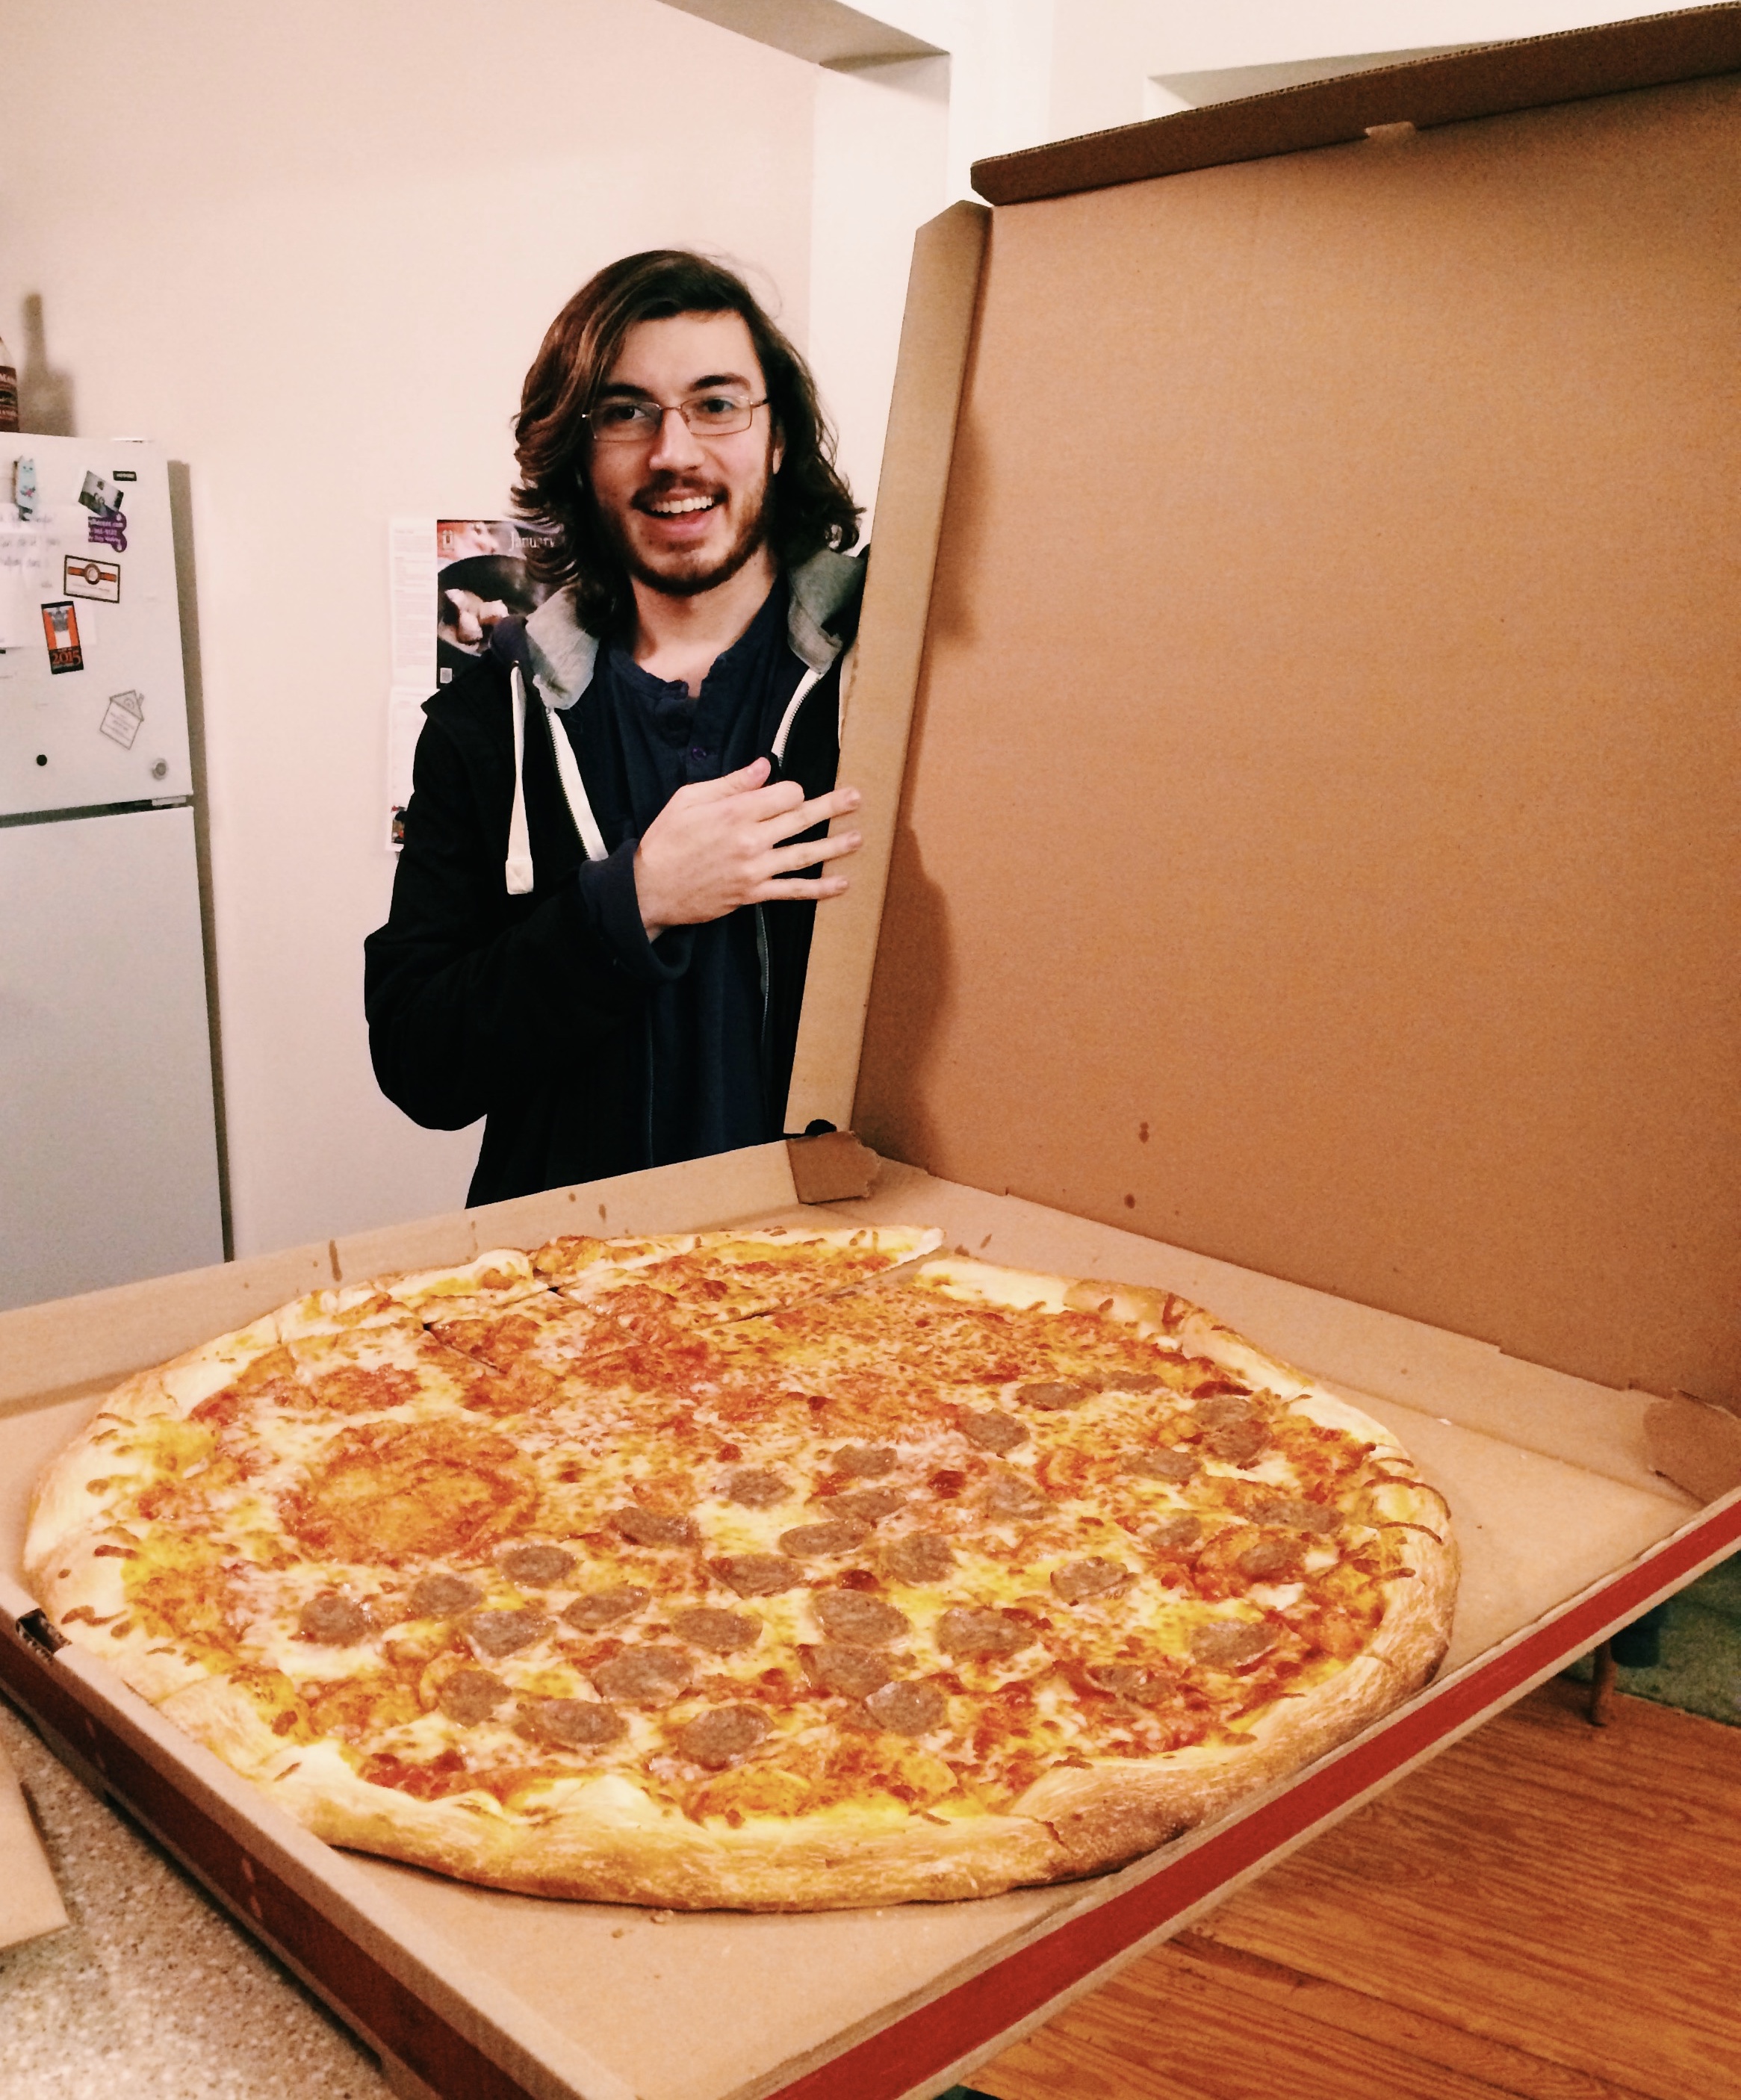 Liam Robb poses with a 28-inch pizza. Photo by MaKayla Grapperhaus